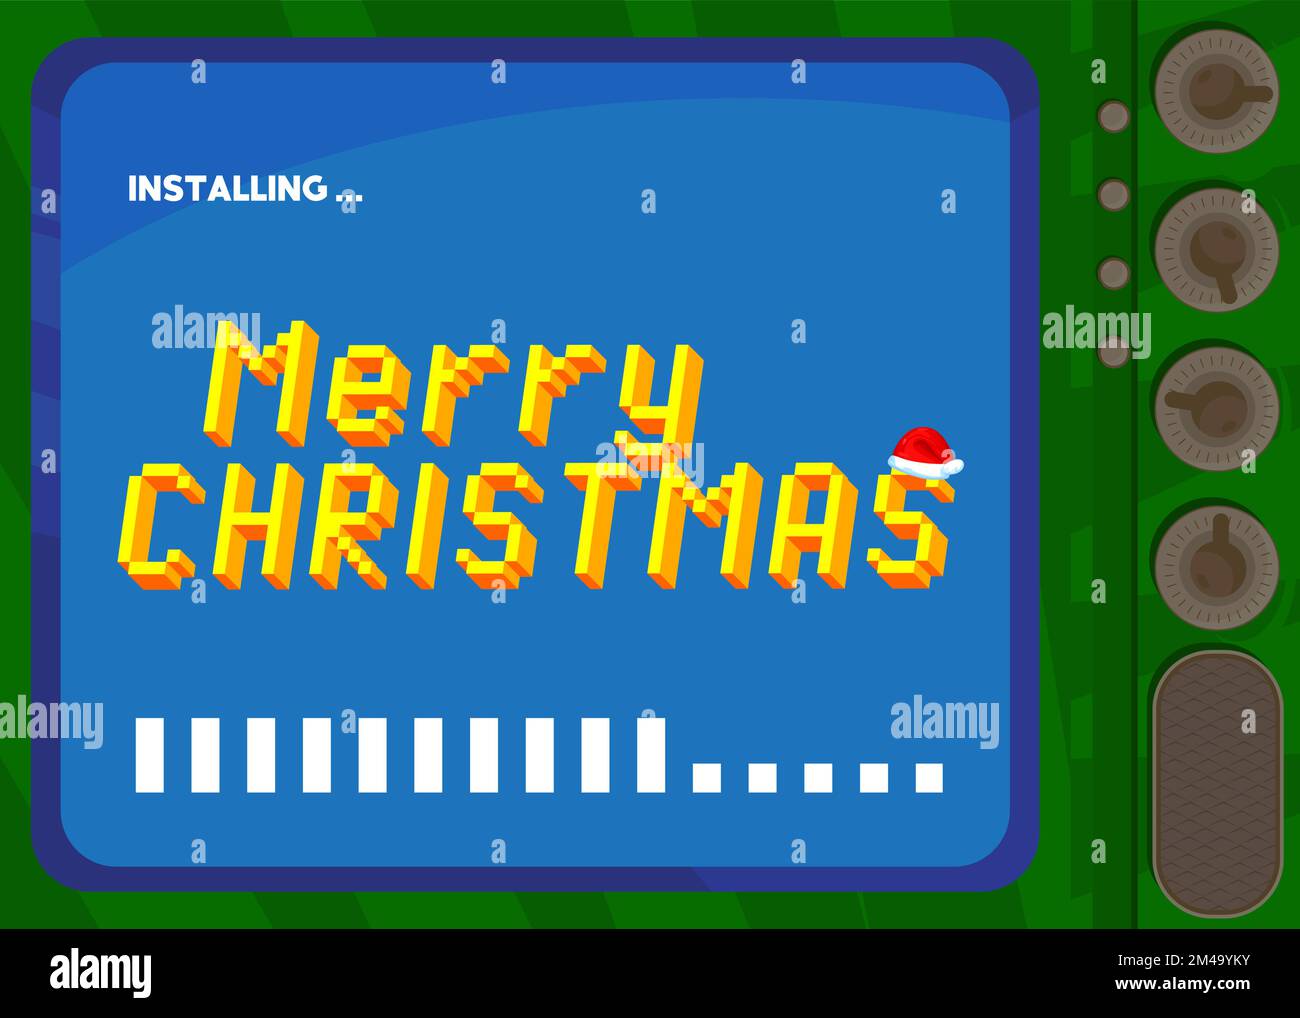 Cartoon Computer With the word Merry Christmas. Message of a screen displaying an installation window. Stock Vector